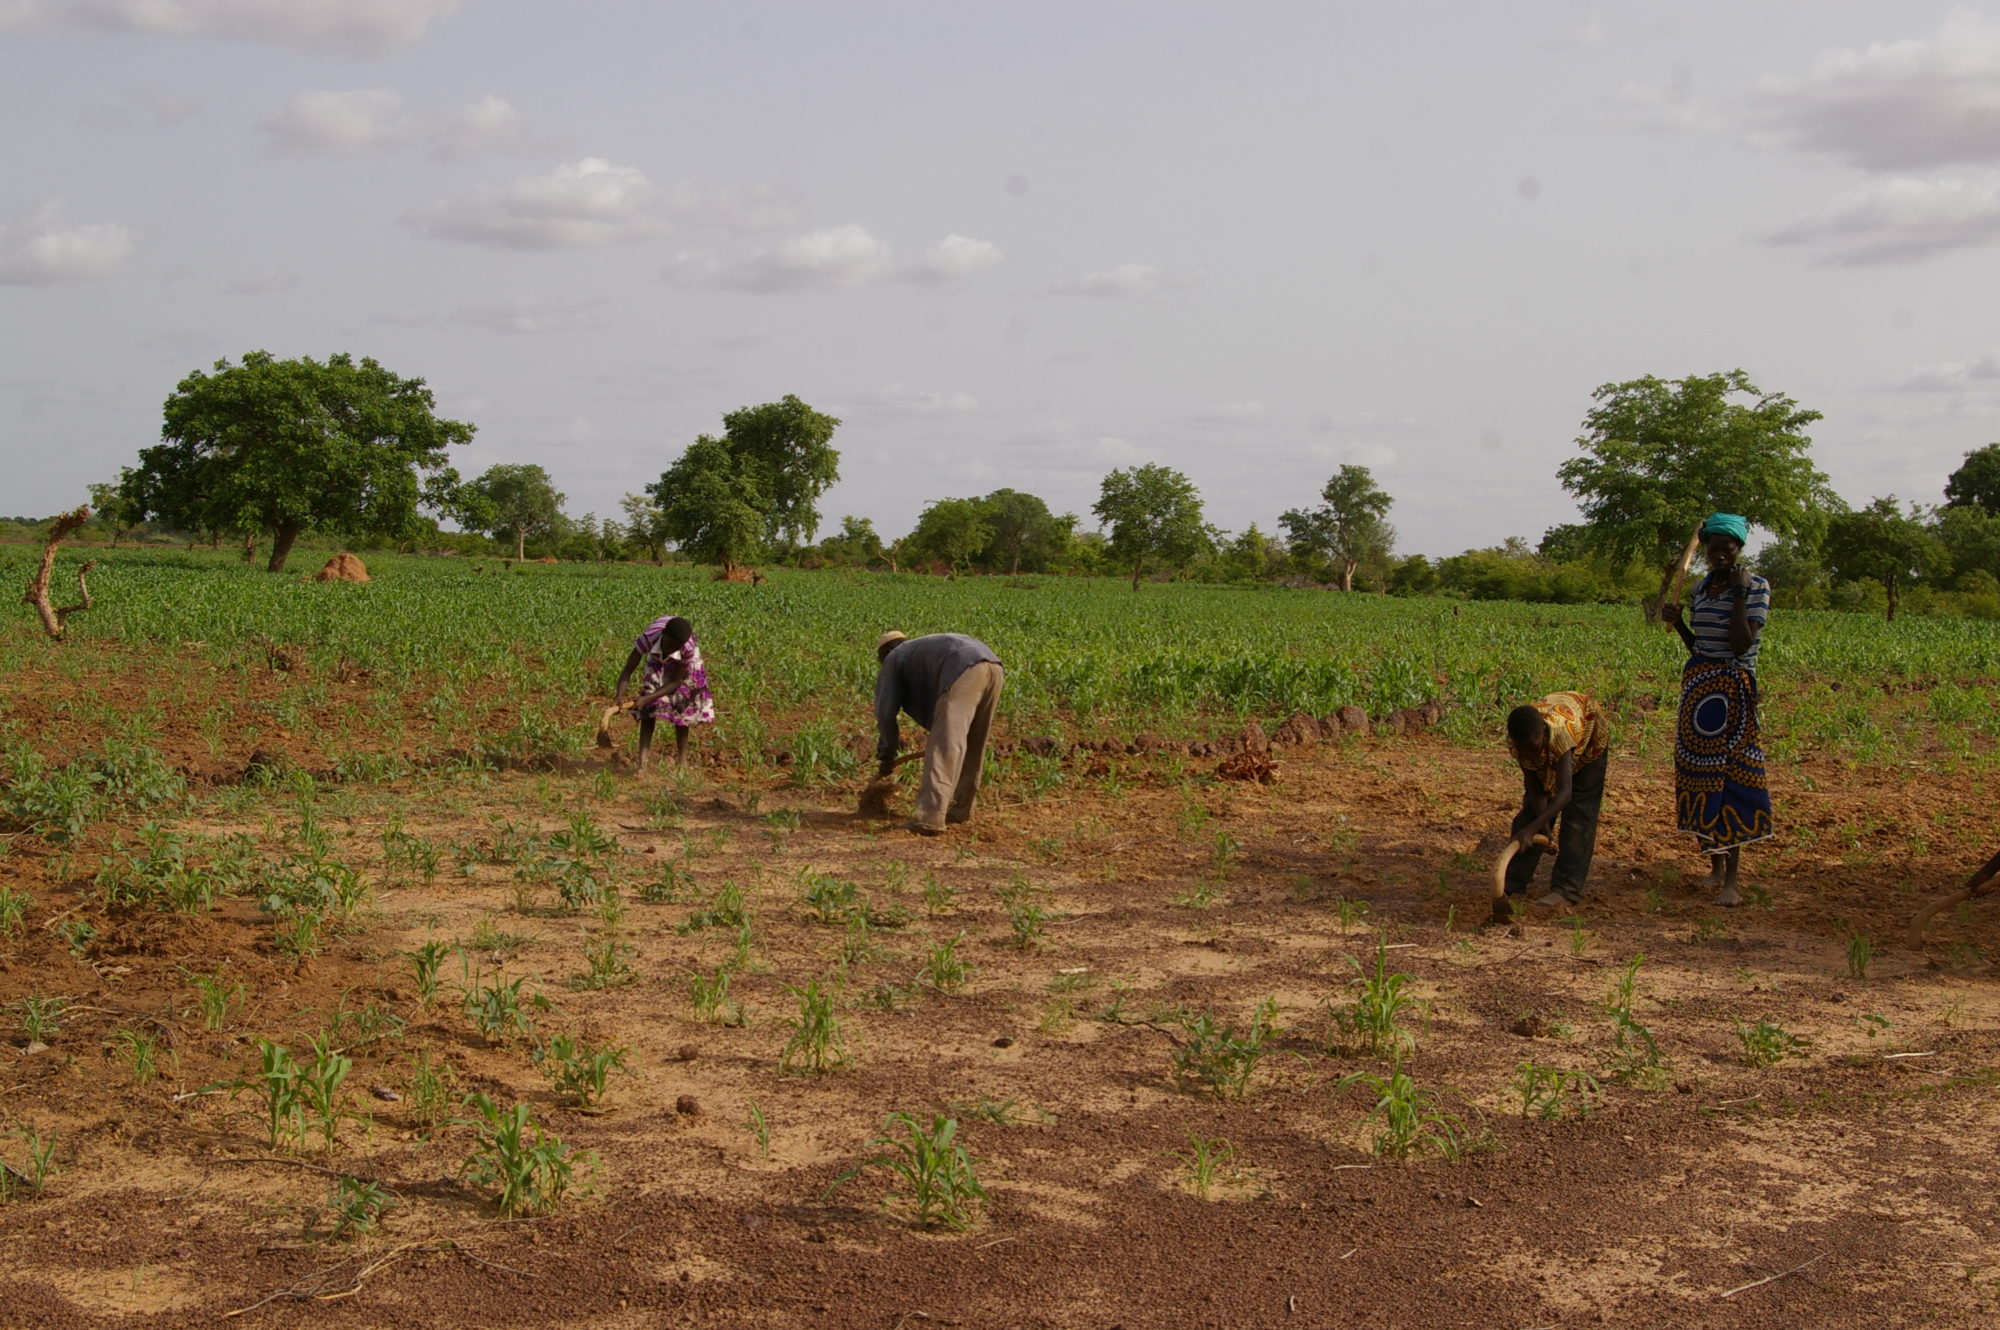 THE FUTURE OF WEST AFRICAN AGRICULTURE